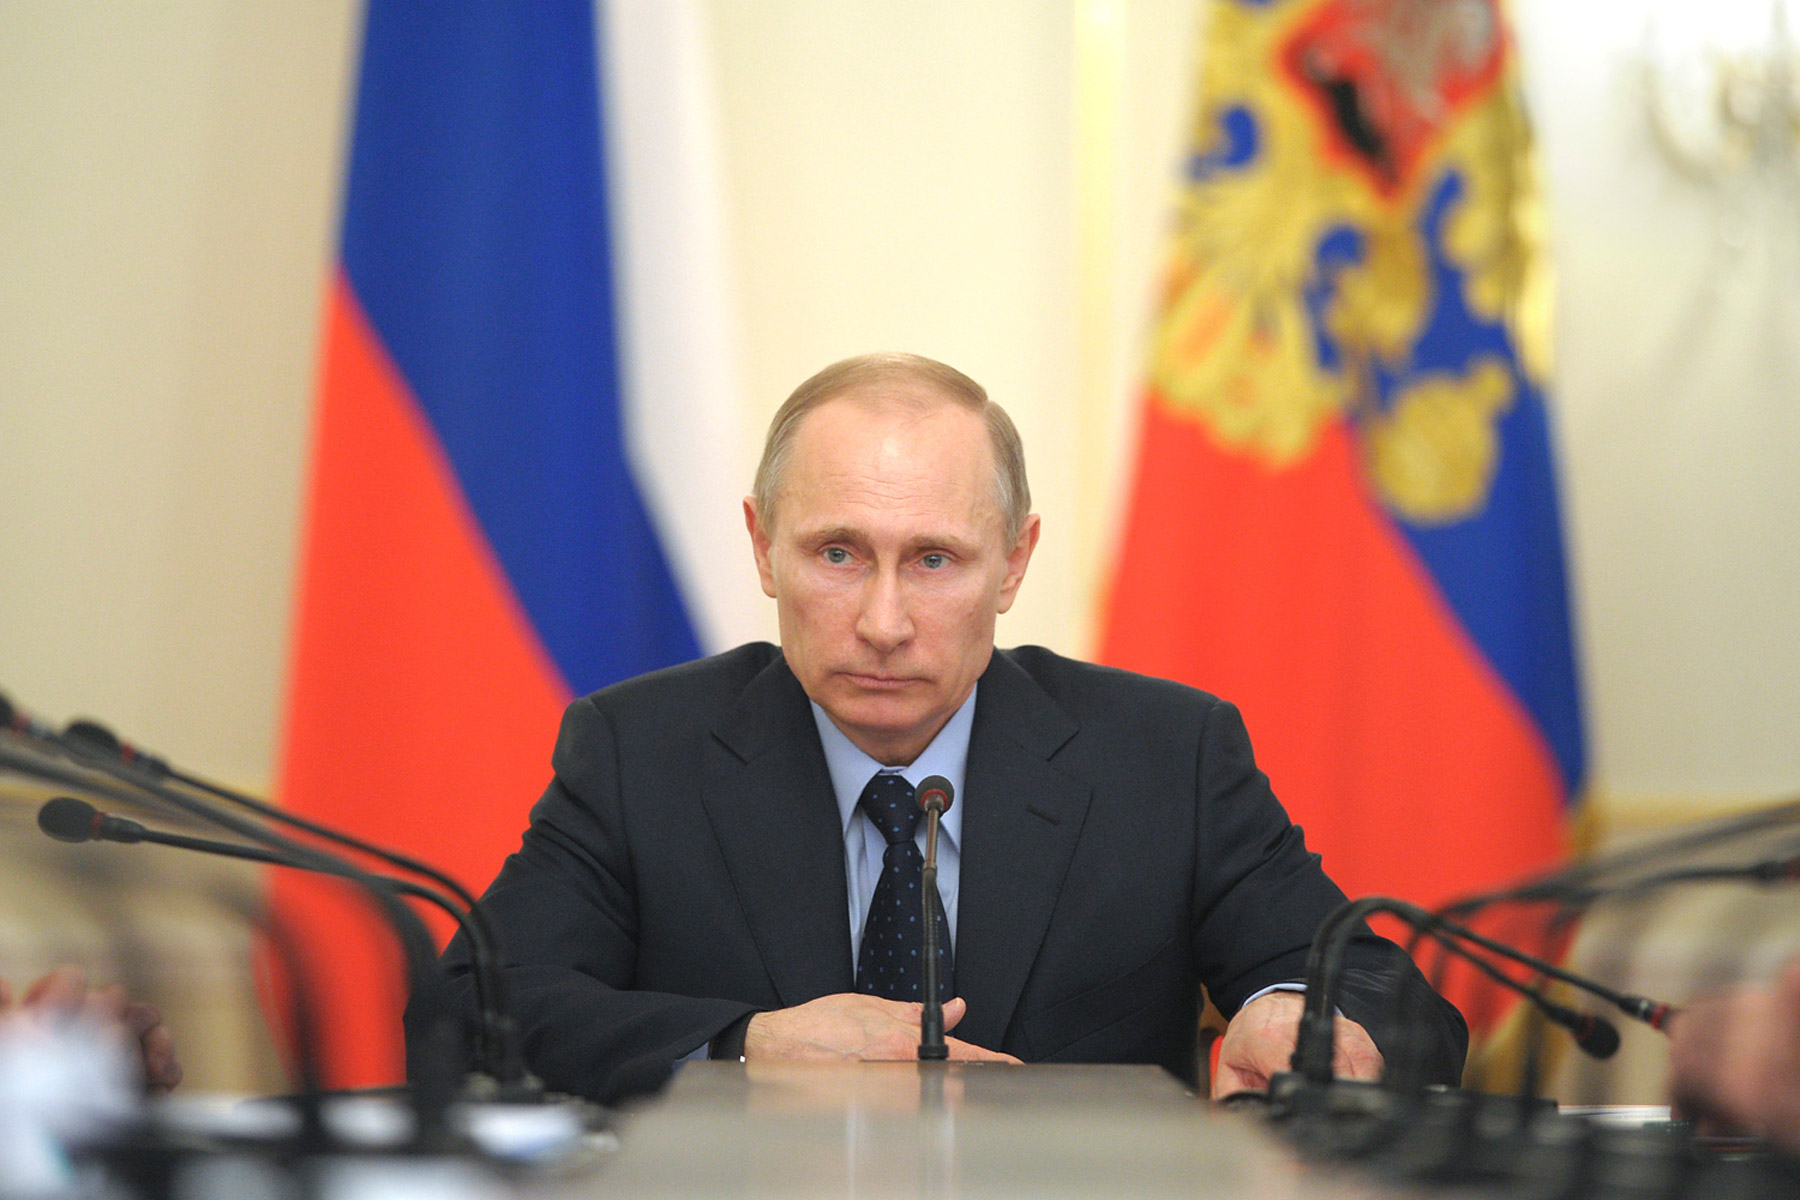 Russian President Vladimir Putin chairs Russian government meeting at Novo-Ogaryovo residence outside Moscow